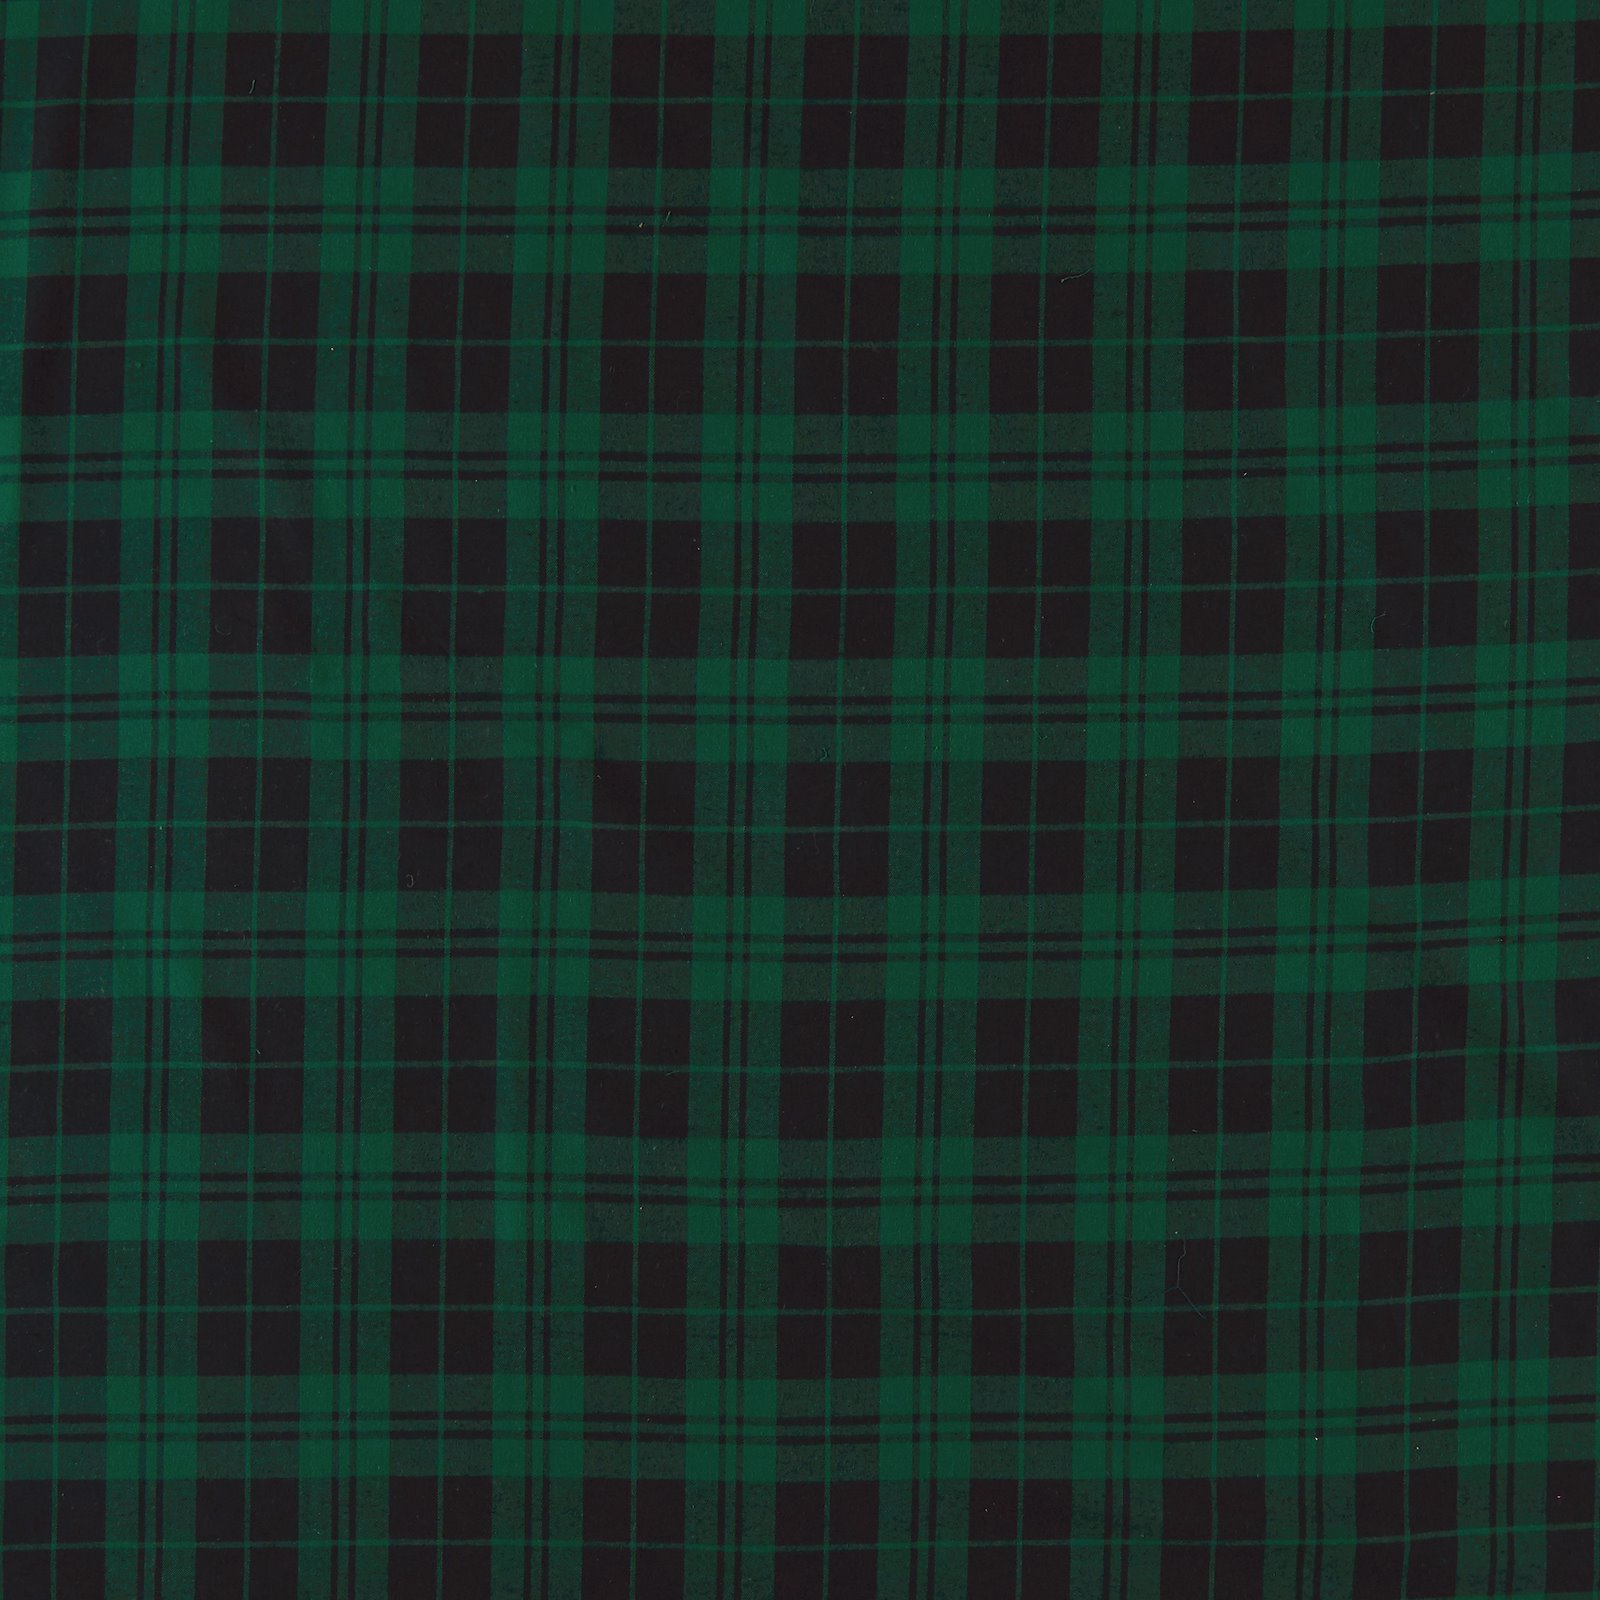 Woven cotton green/black YD check 501809_pack_sp